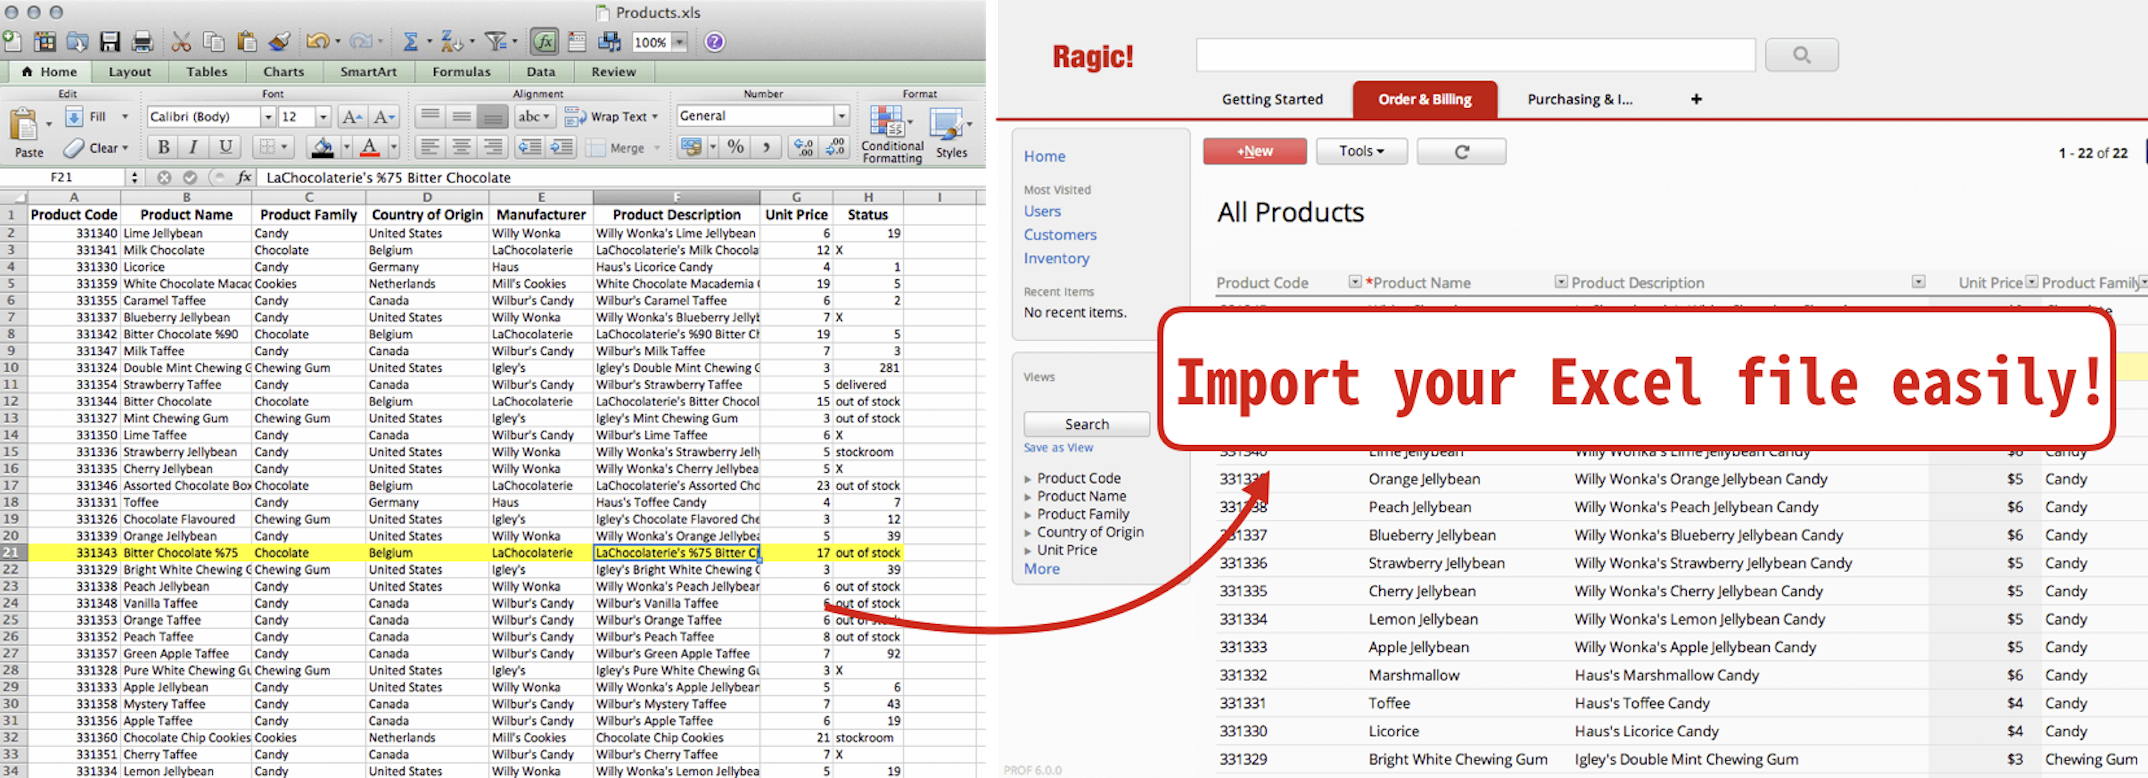 Import your Excel file easily!